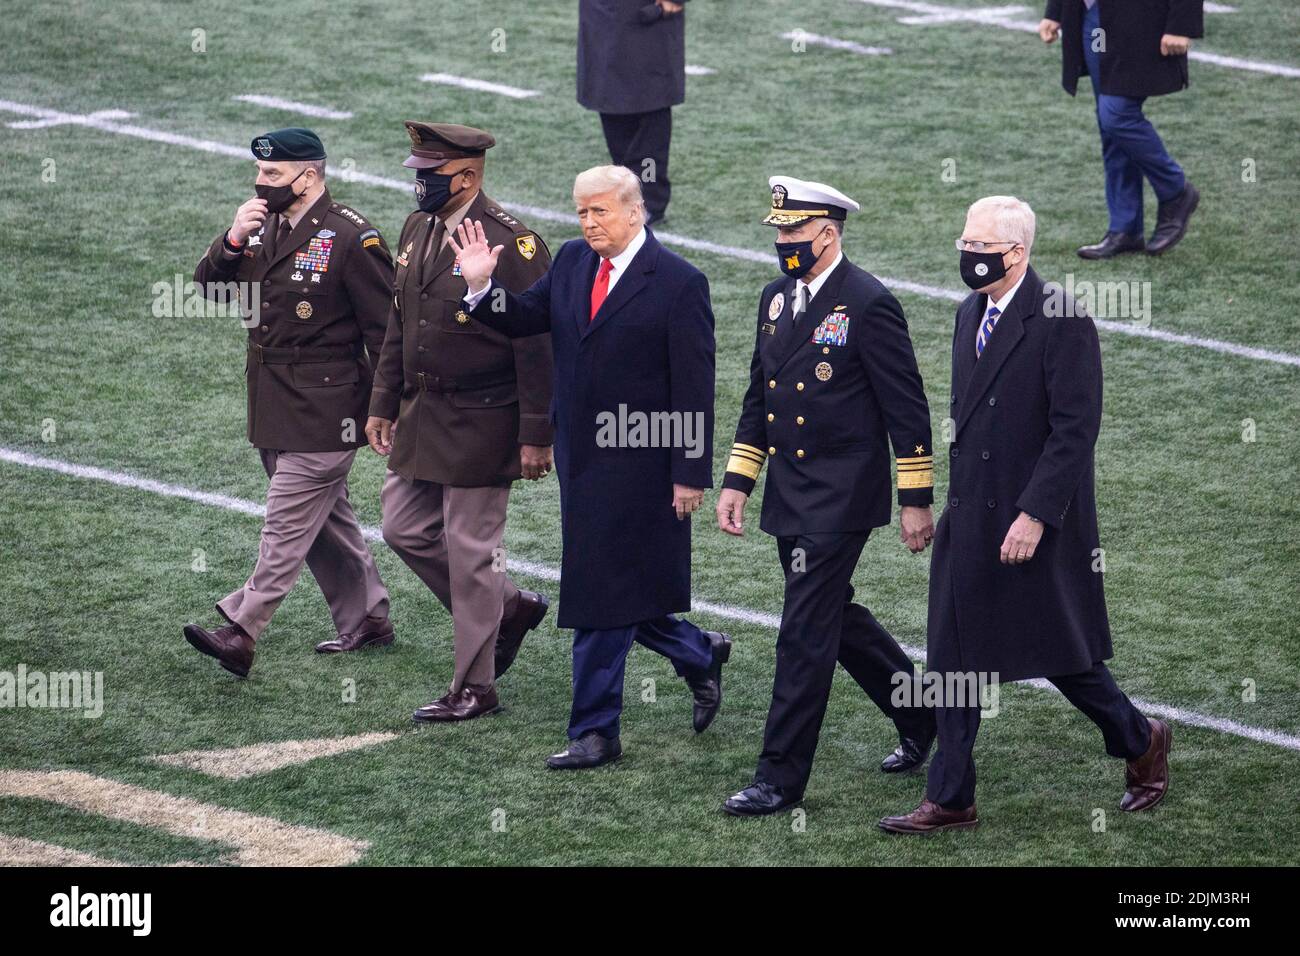 U.S. President Donald Trump walks out for the coin toss to start the 121st Army-Navy football game at Michie Stadium December 12, 2019 in West Point, New York. Walking alongside the president are left to right: Chairman of the Joint Chiefs Gen. Mark Milley, Lt. Gen. Darryl Williams, Superintendent of the U.S. Military Academy, Adm. Sean Buck, Superintendent of the U.S. Naval Academy and Acting Defense Secretary Christopher Miller. Stock Photo